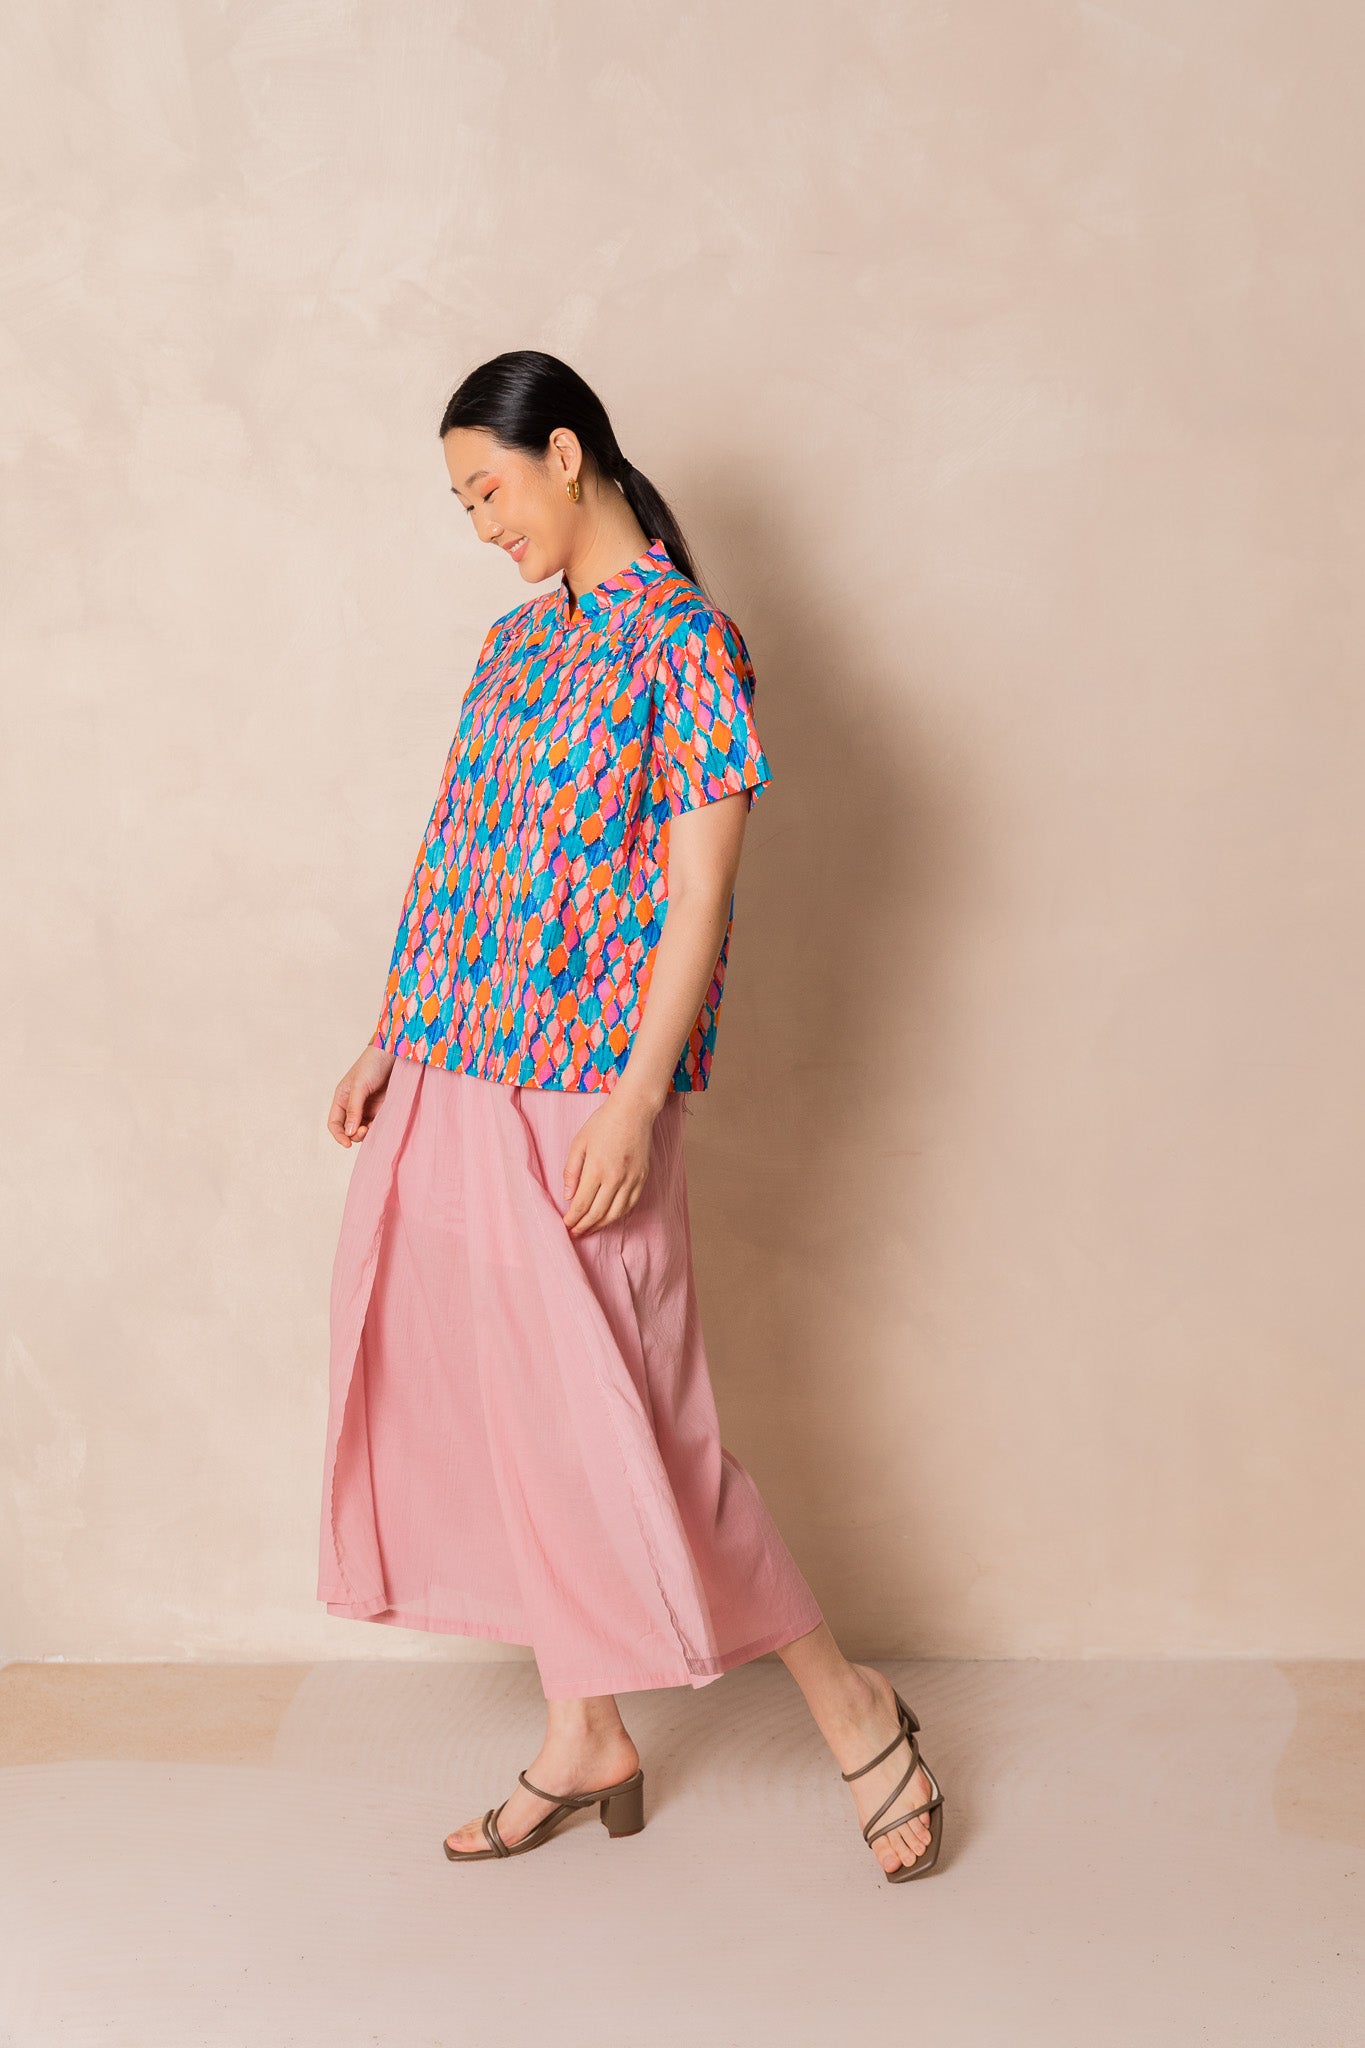 Water Colour Geometric Print Short Sleeve Cheongsam Top, available on You Living